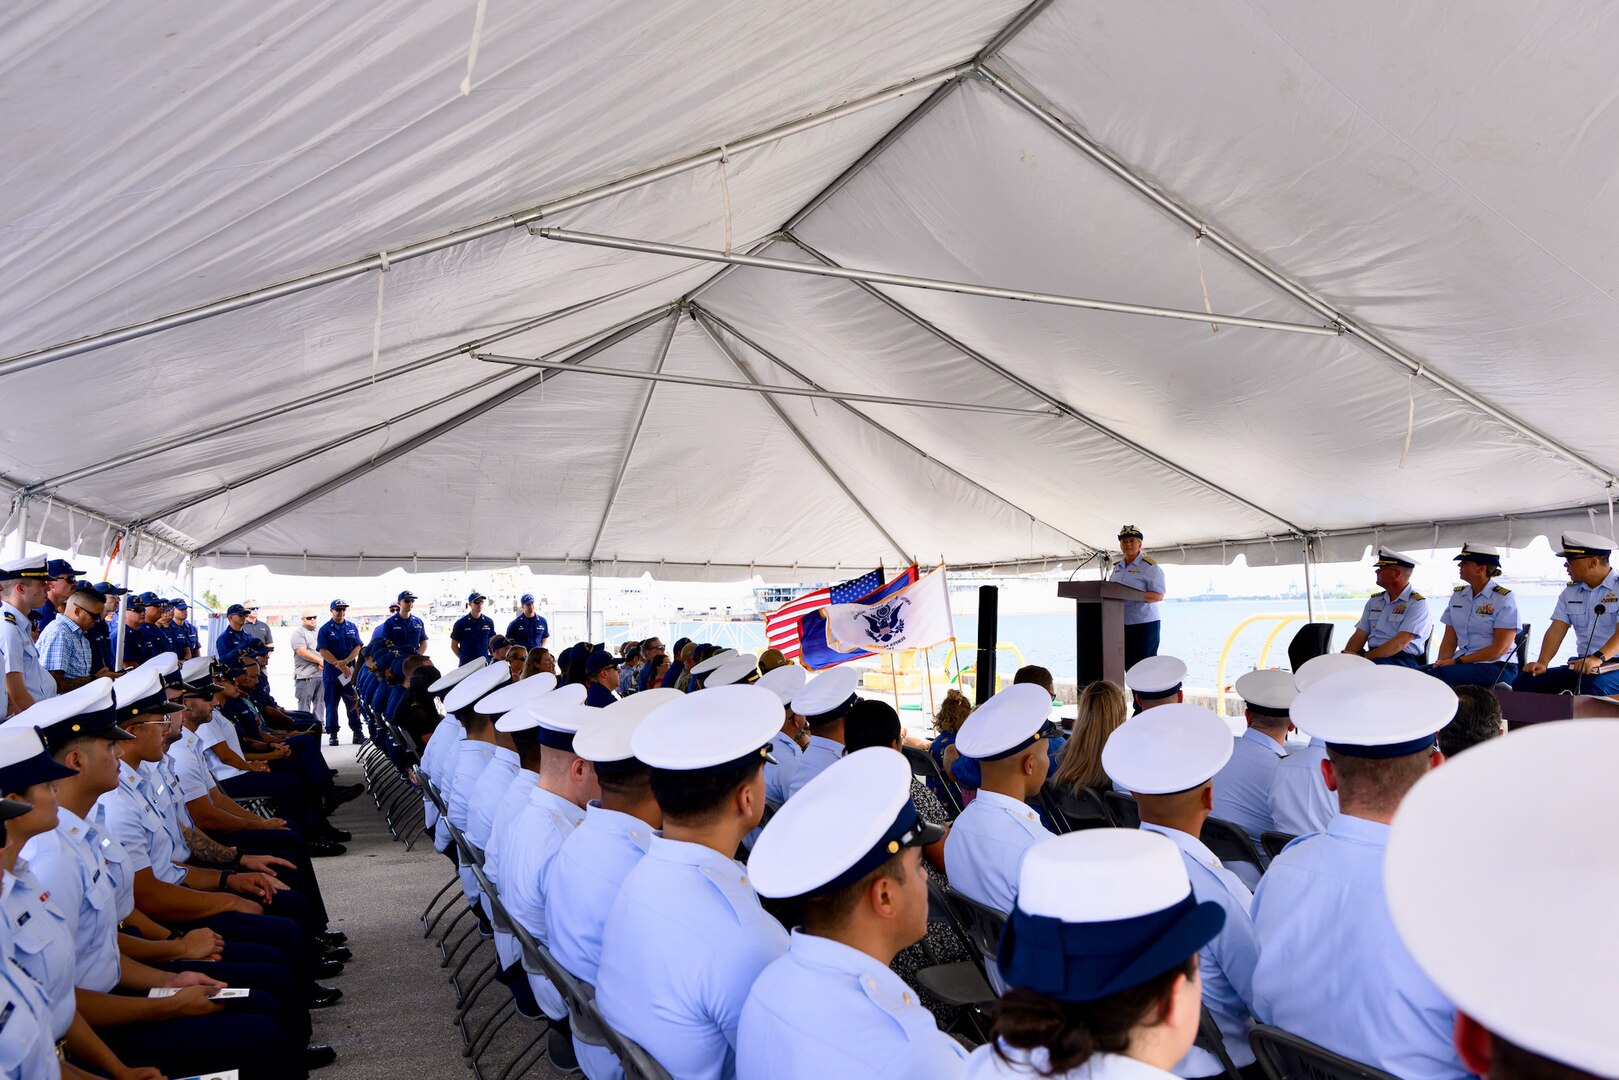 The U.S. Coast Guard holds an establishment for U.S. Coast Guard Base Guam on Nov. 8, 2023, in a ceremony presided over by Rear Adm. Carola List, commander of Operational Logistics Command. Led by Cmdr. Dana Hiatt, Base Guam, will be pivotal toward enhancing the U.S. Coast Guard's mission support logistics in the region. This strategic move aligns with the Service's commitment to increase mission support throughout Oceania. Given Guam's vital importance to national security, this initiative takes center stage. (U.S. Coast Guard photo by David Lau)